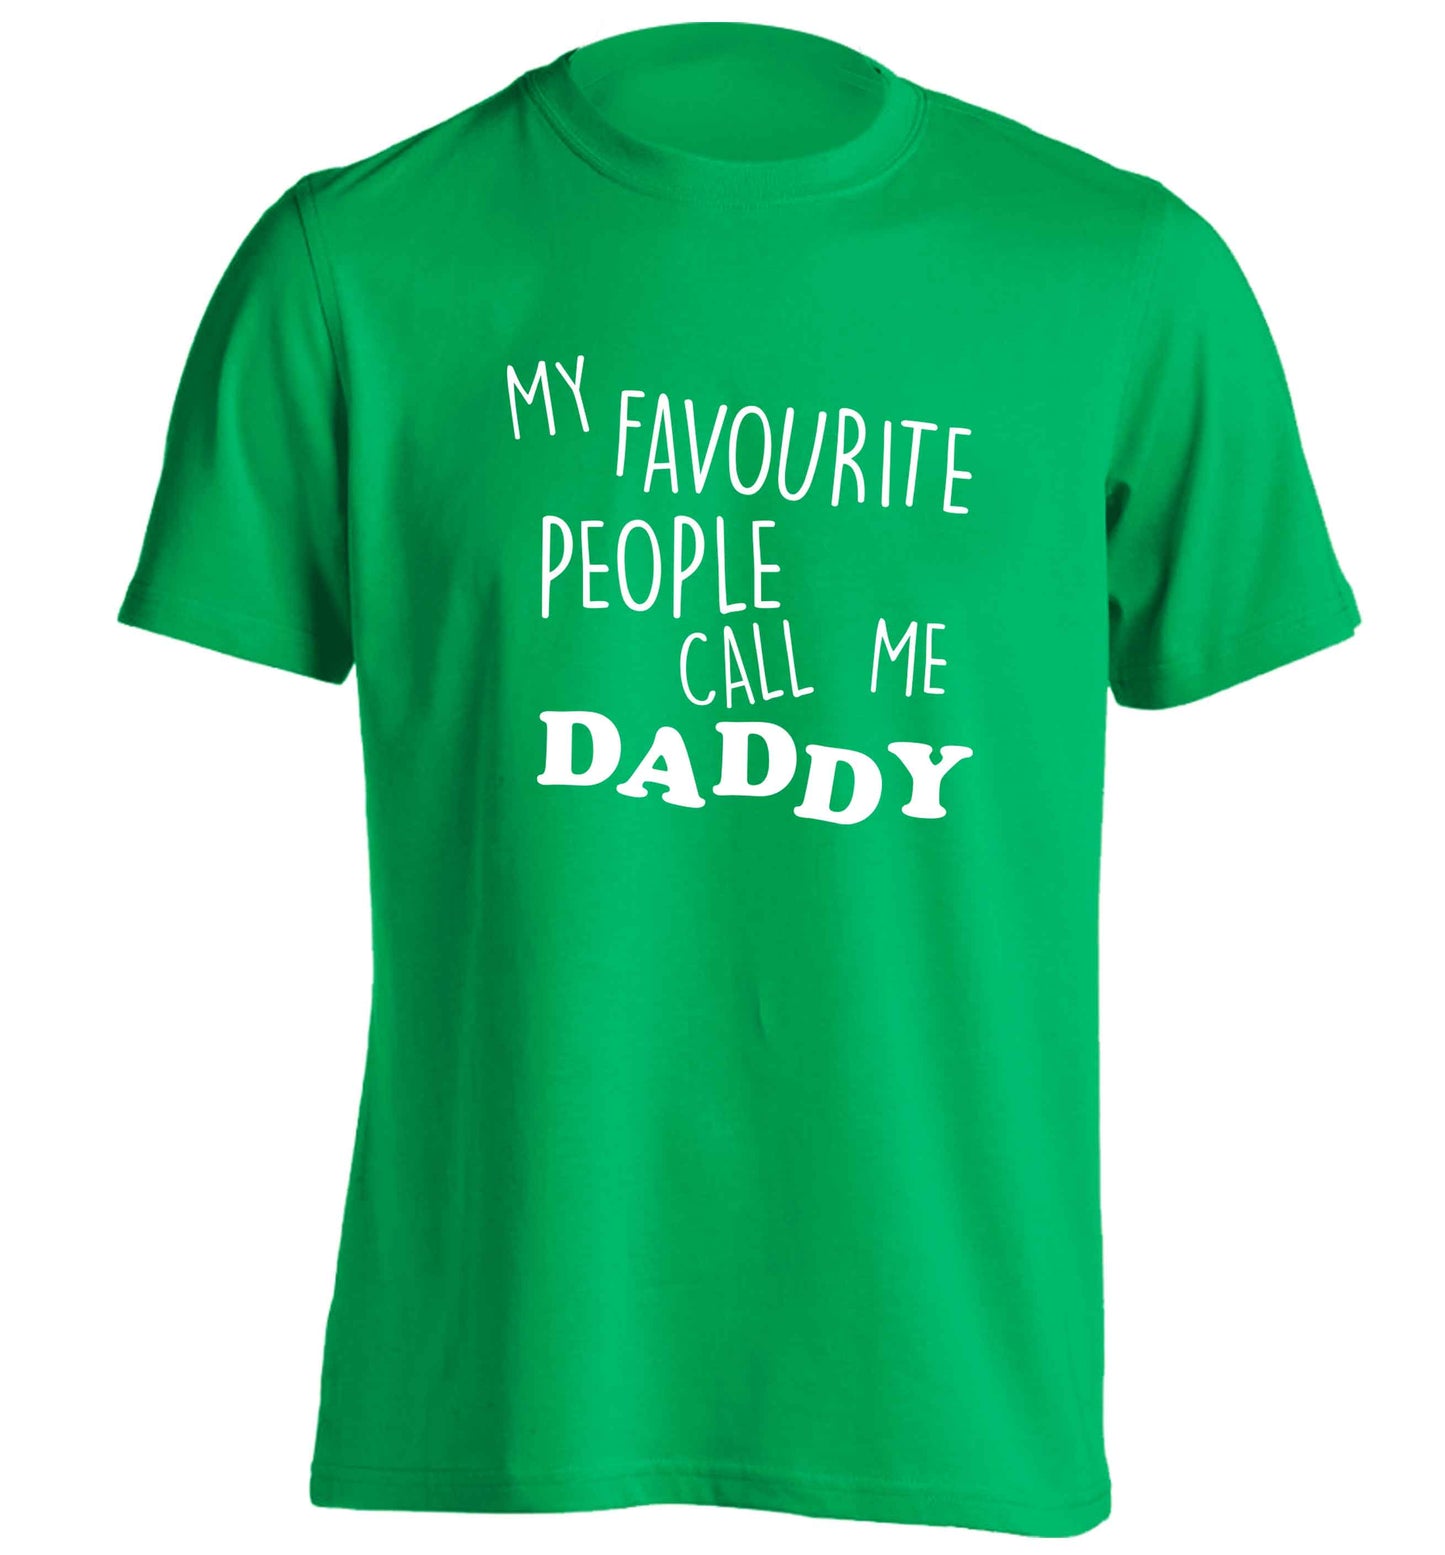 My favourite people call me daddy adults unisex green Tshirt 2XL